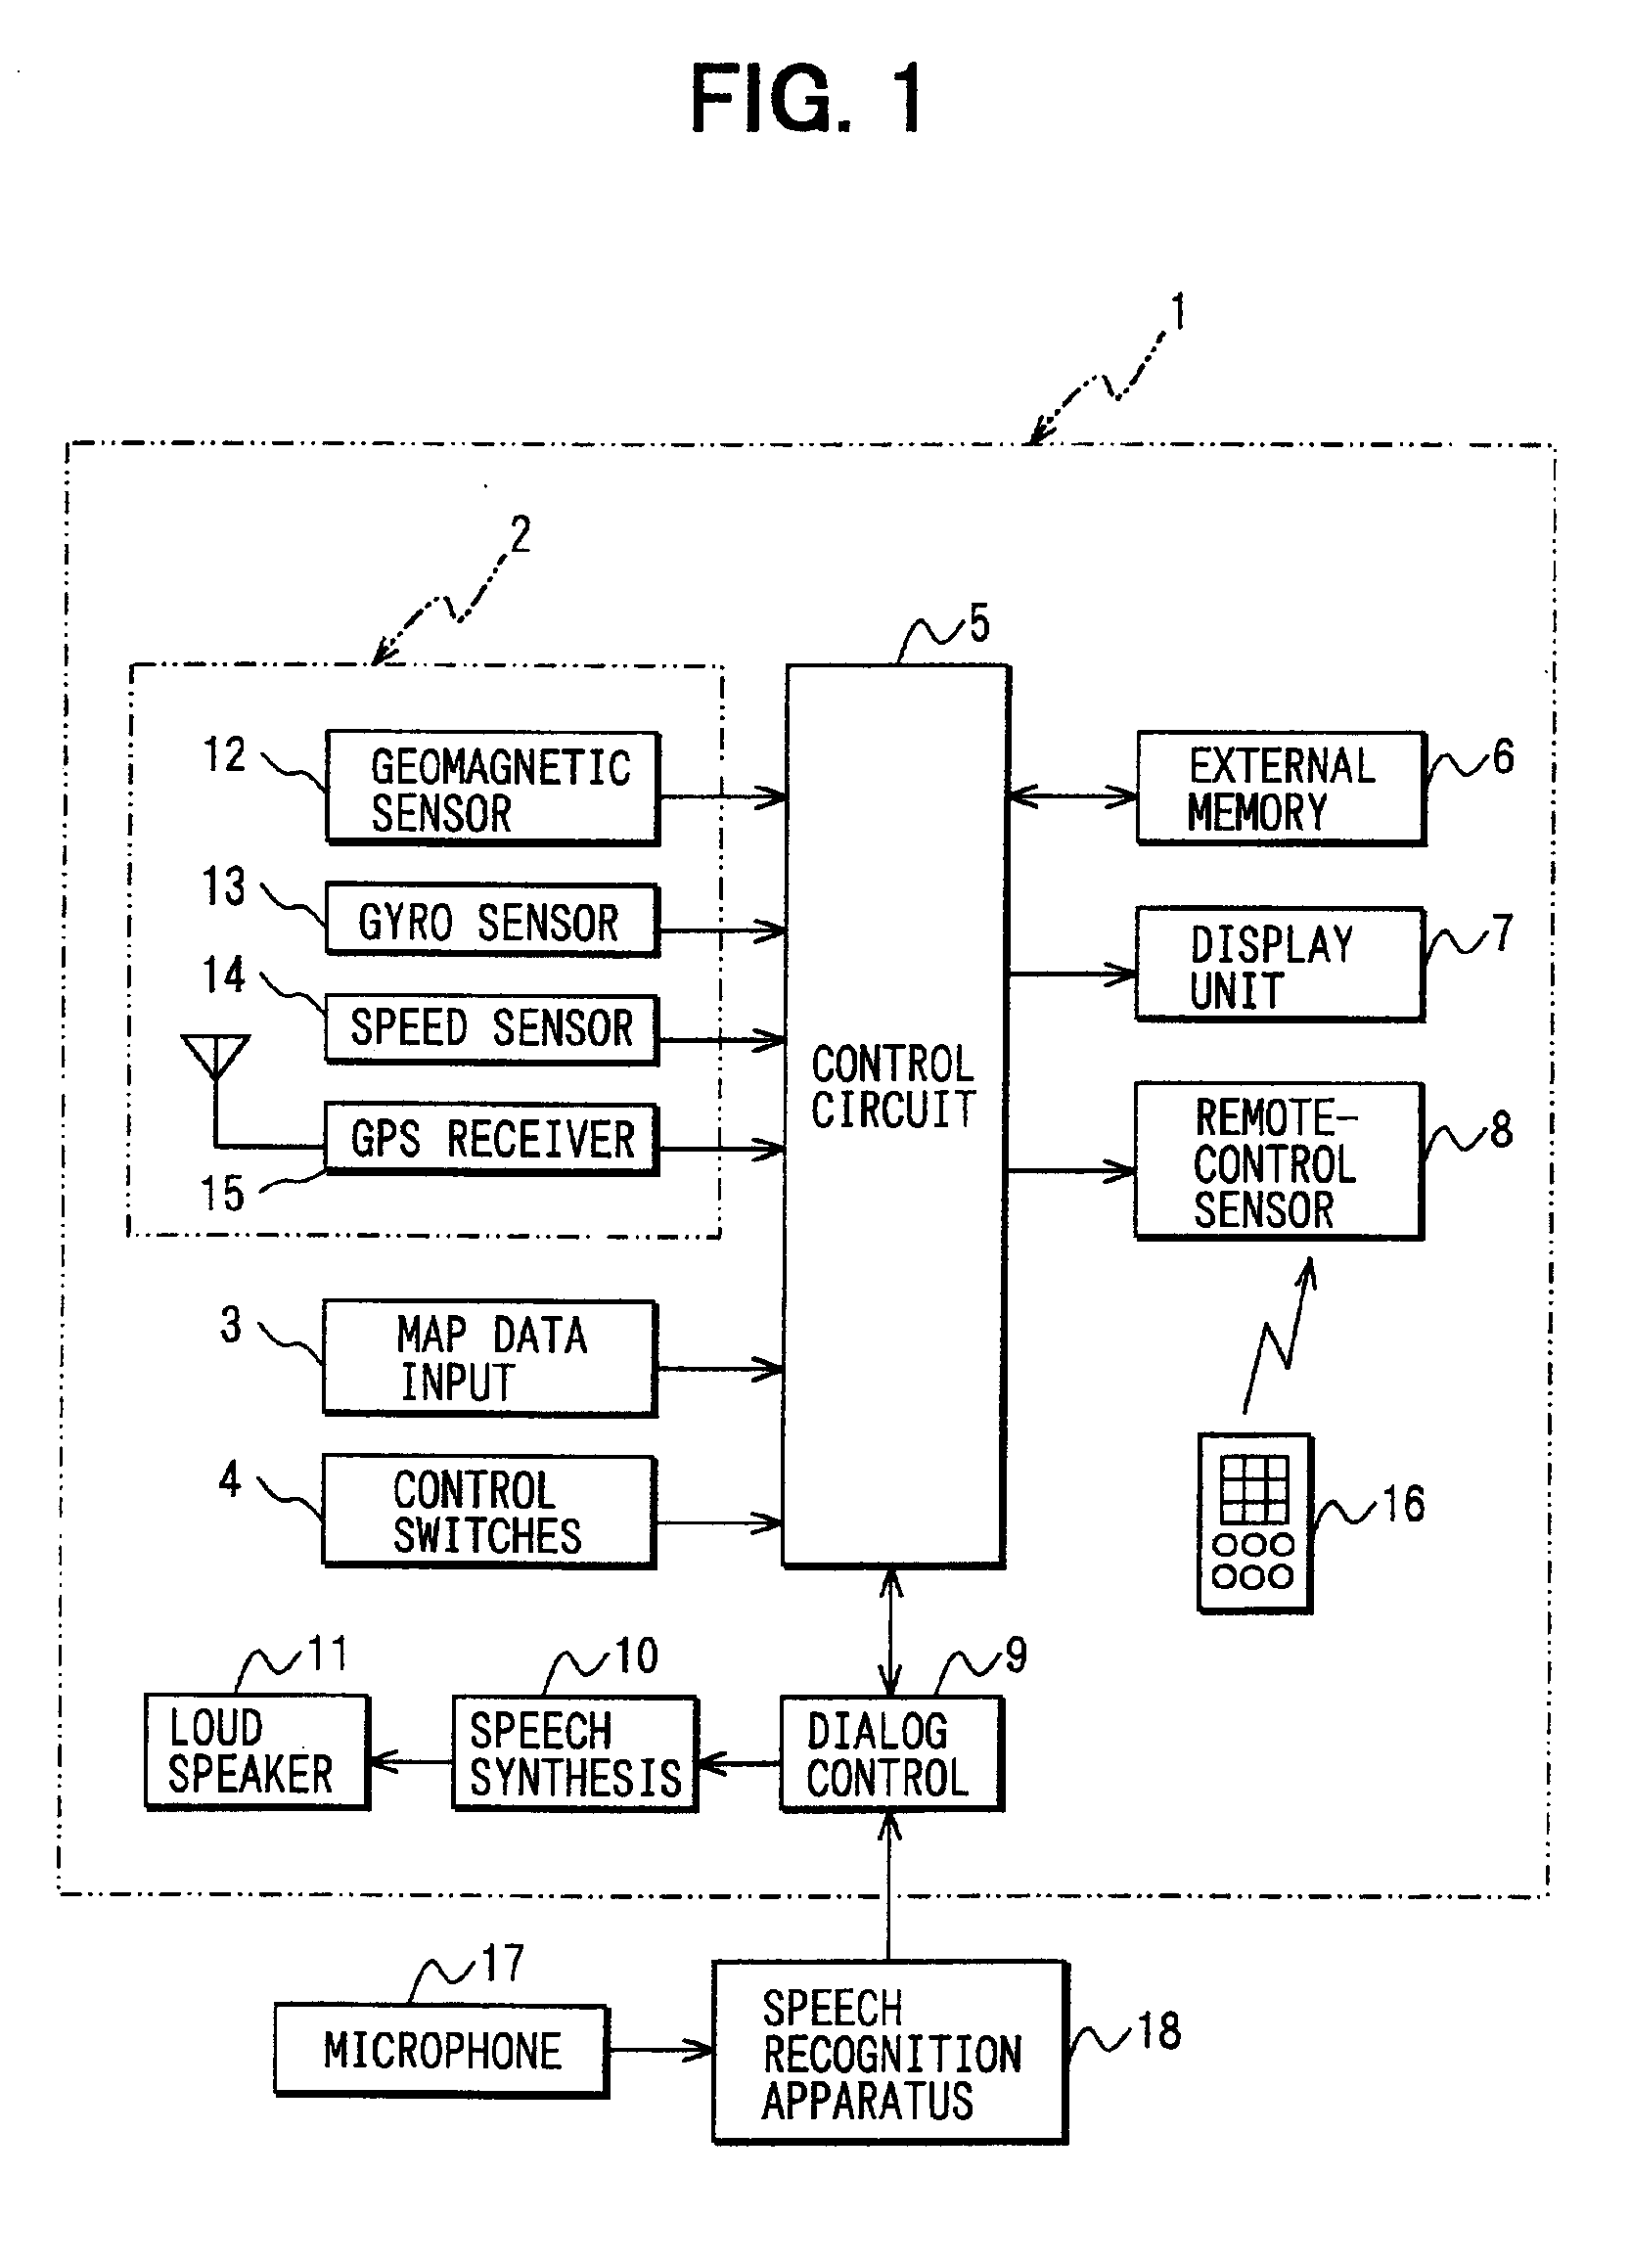 Speech recognition apparatus and method using two opposite words